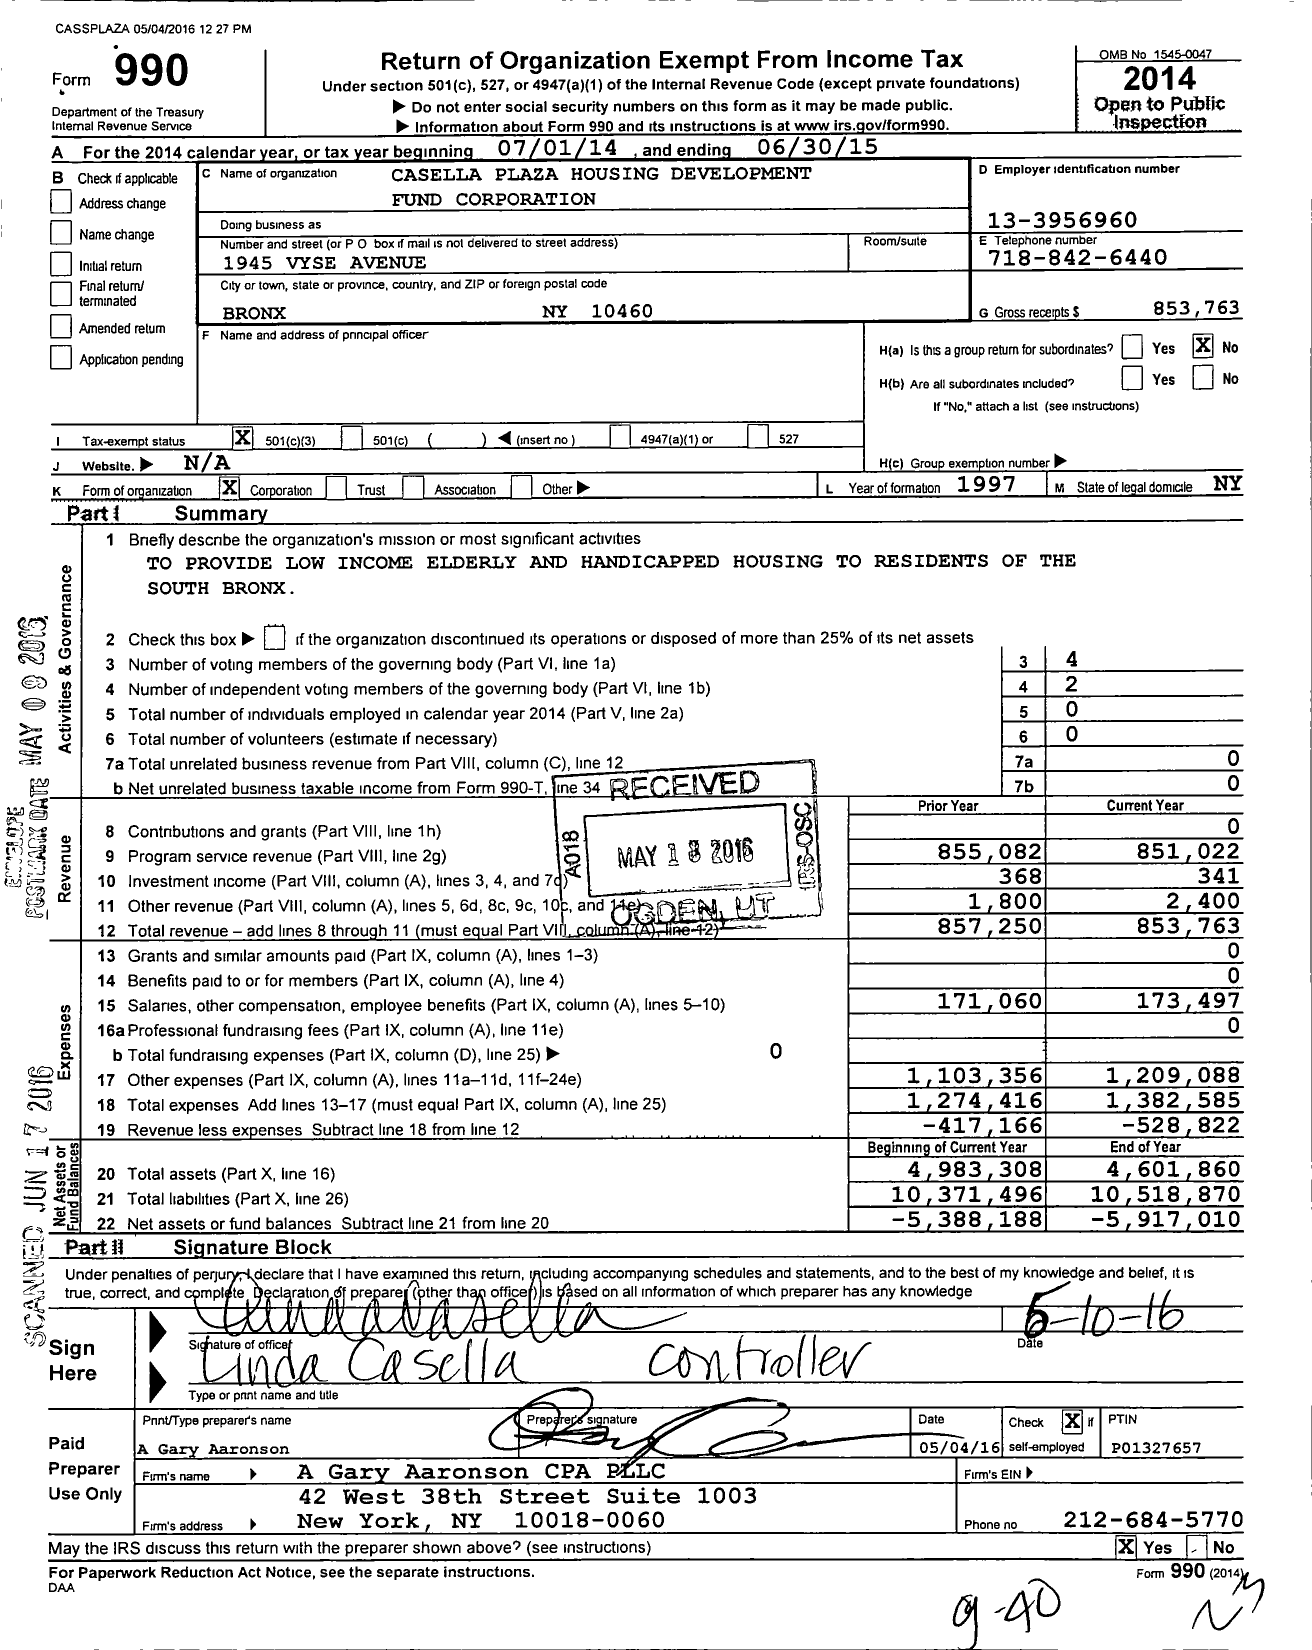 Image of first page of 2014 Form 990 for Casella Plaza Housing Development Fund Corporation